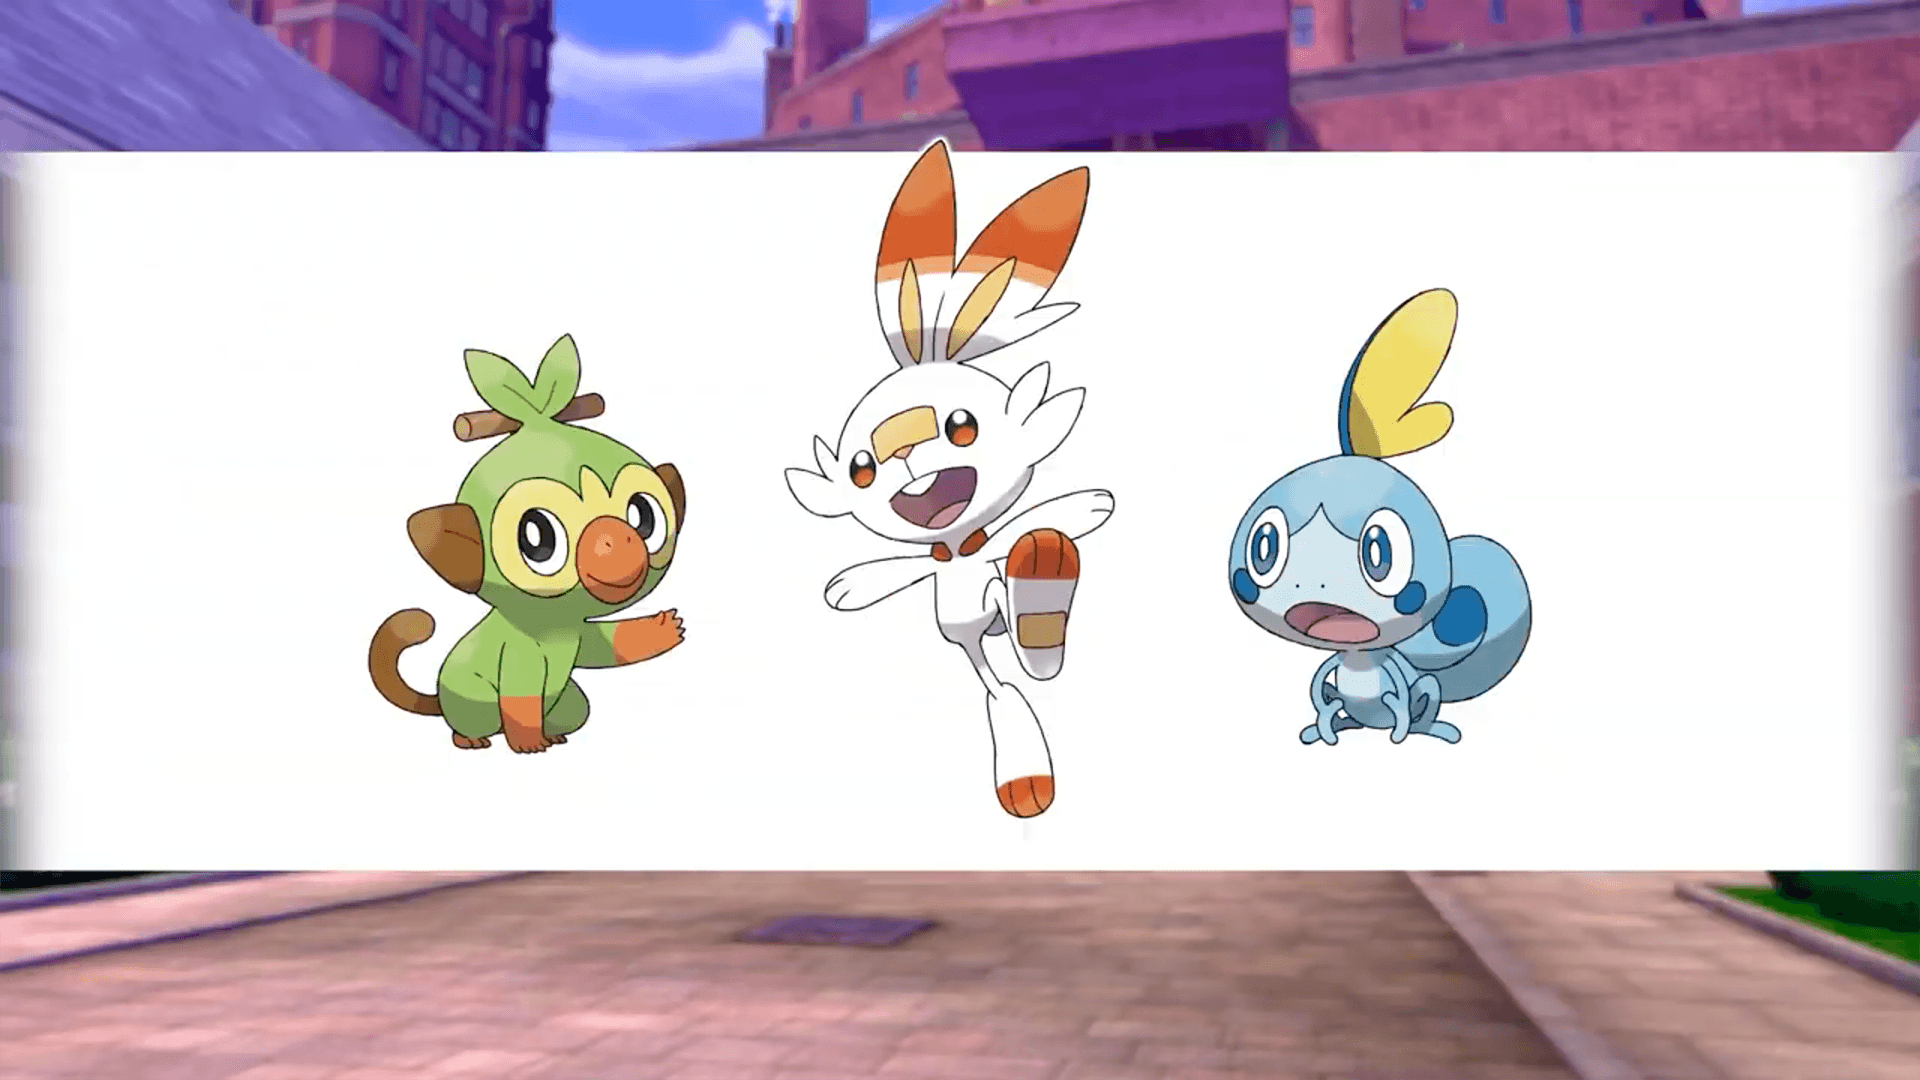 Starters Announced for Pokemon Sword and Shield